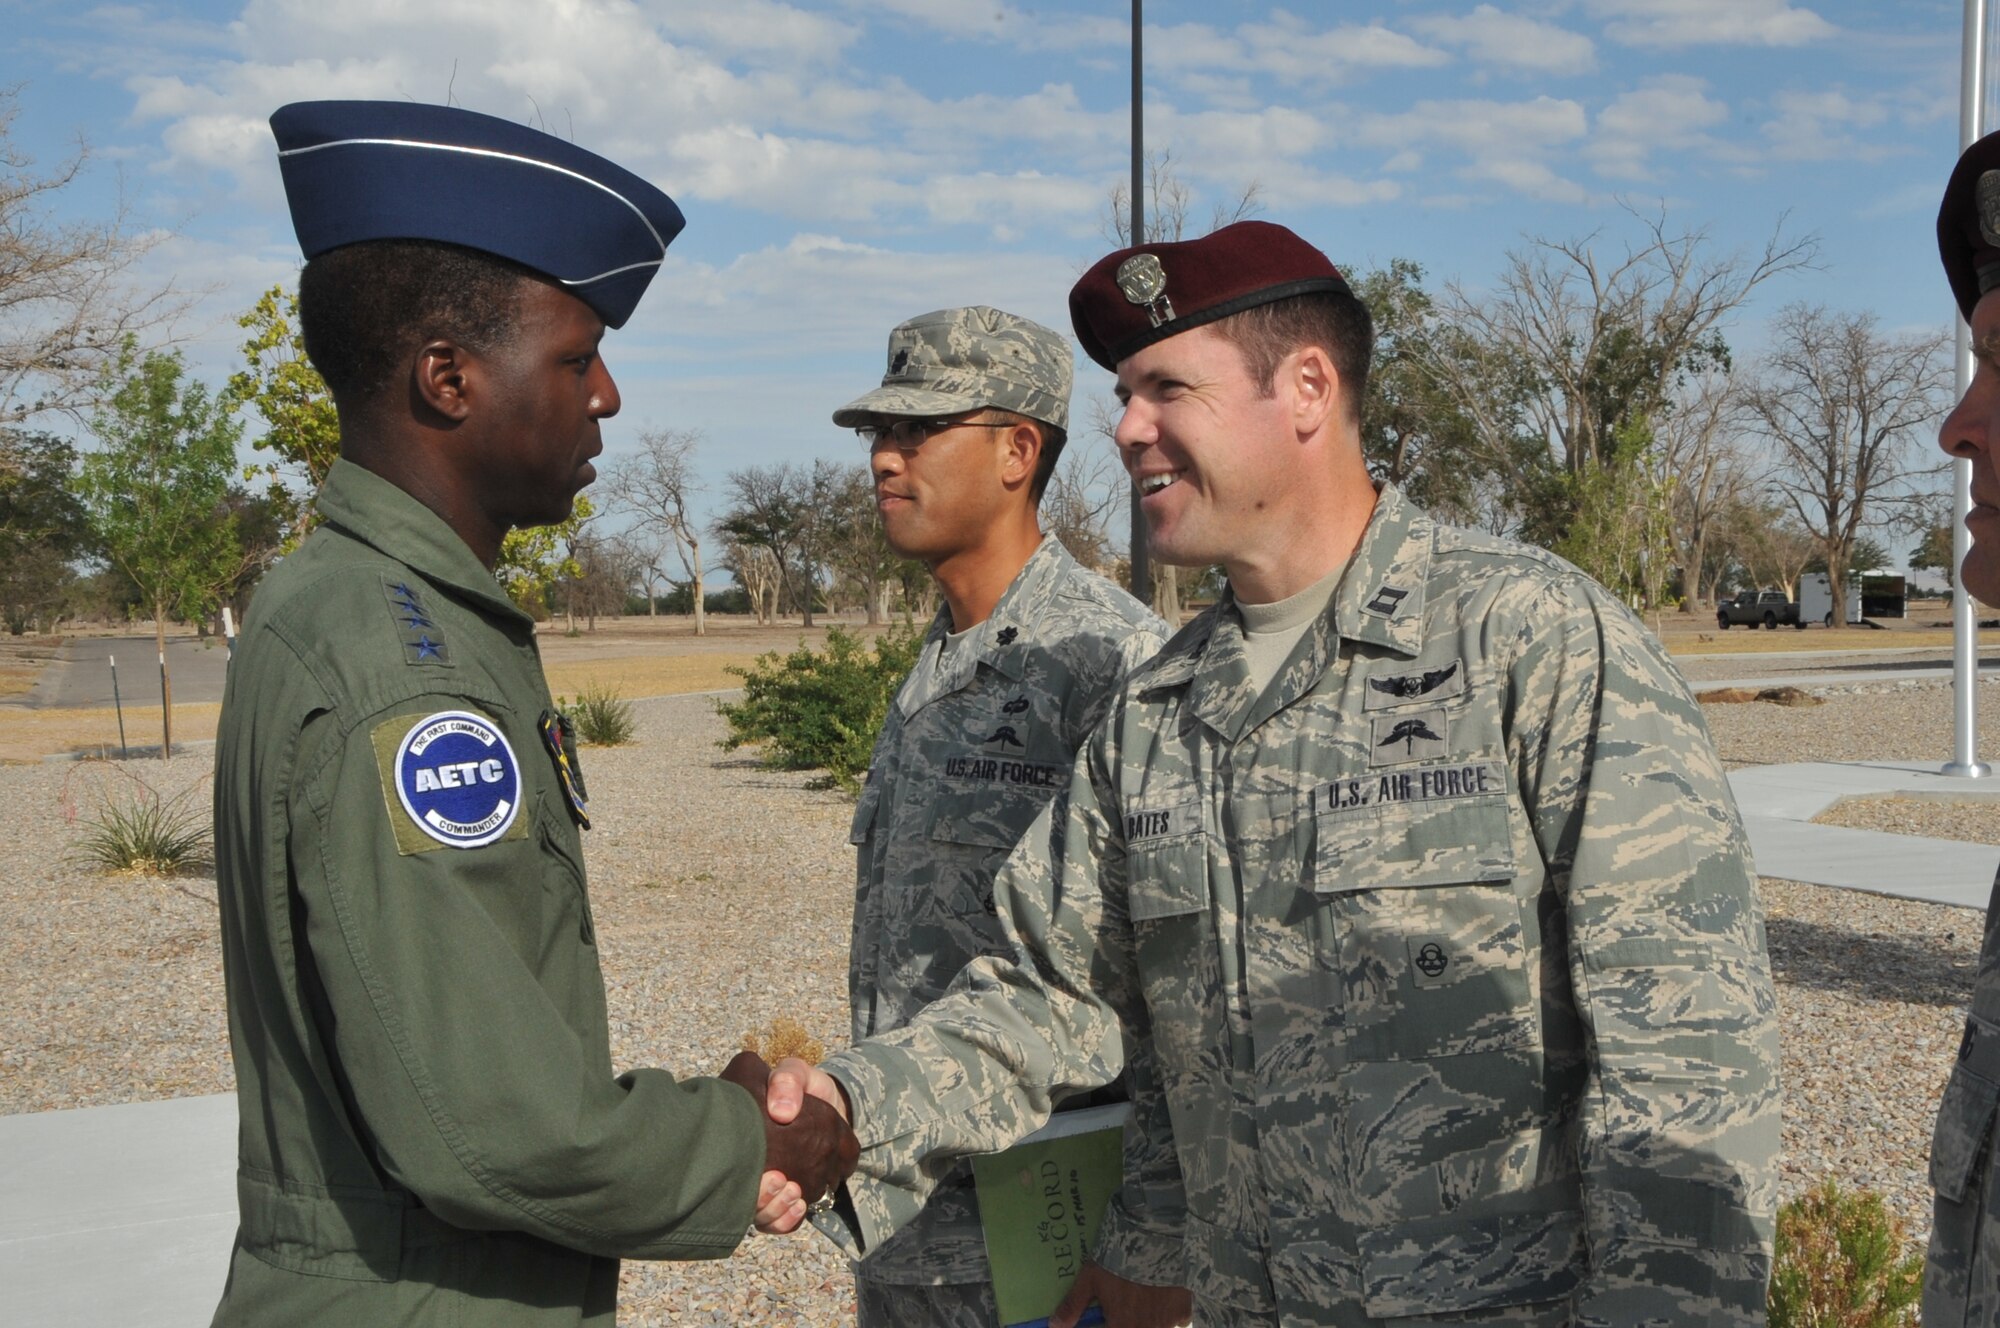 Below, Capt. Luke Bates, 342nd Training Squadron Det 1 commander, right, and Lt. Col. Jerry Kung, 342 TRS commander, greet Gen. Edward A. Rice Jr., AETC commander, during his visit to the Guardian Angel Training Complex.

Photo by Todd Berenger